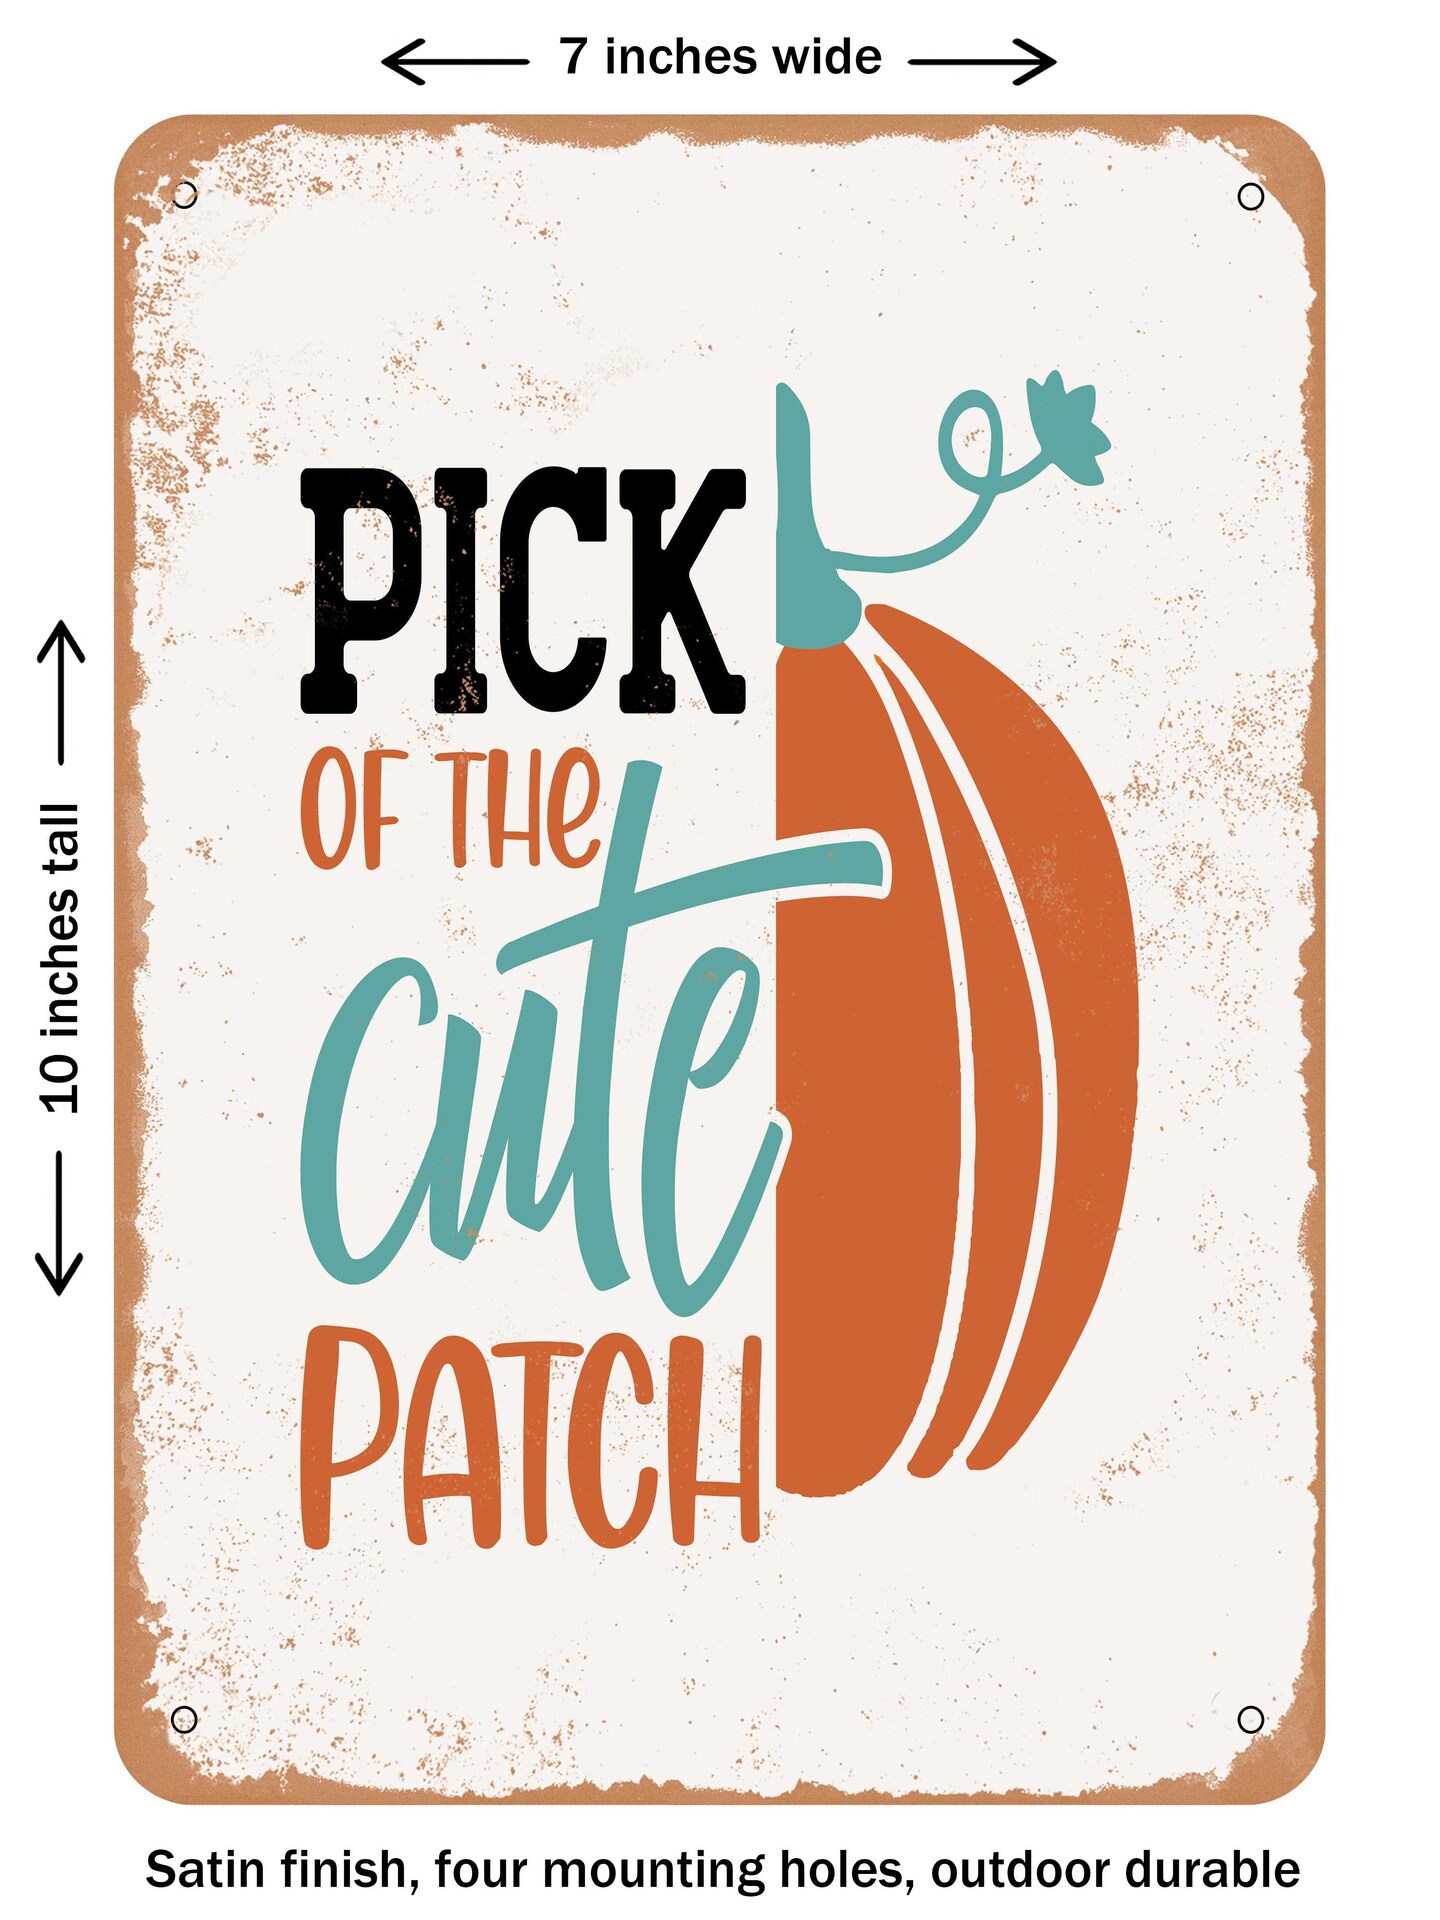 DECORATIVE METAL SIGN - Pick of the Cute Patch - Vintage Rusty Look